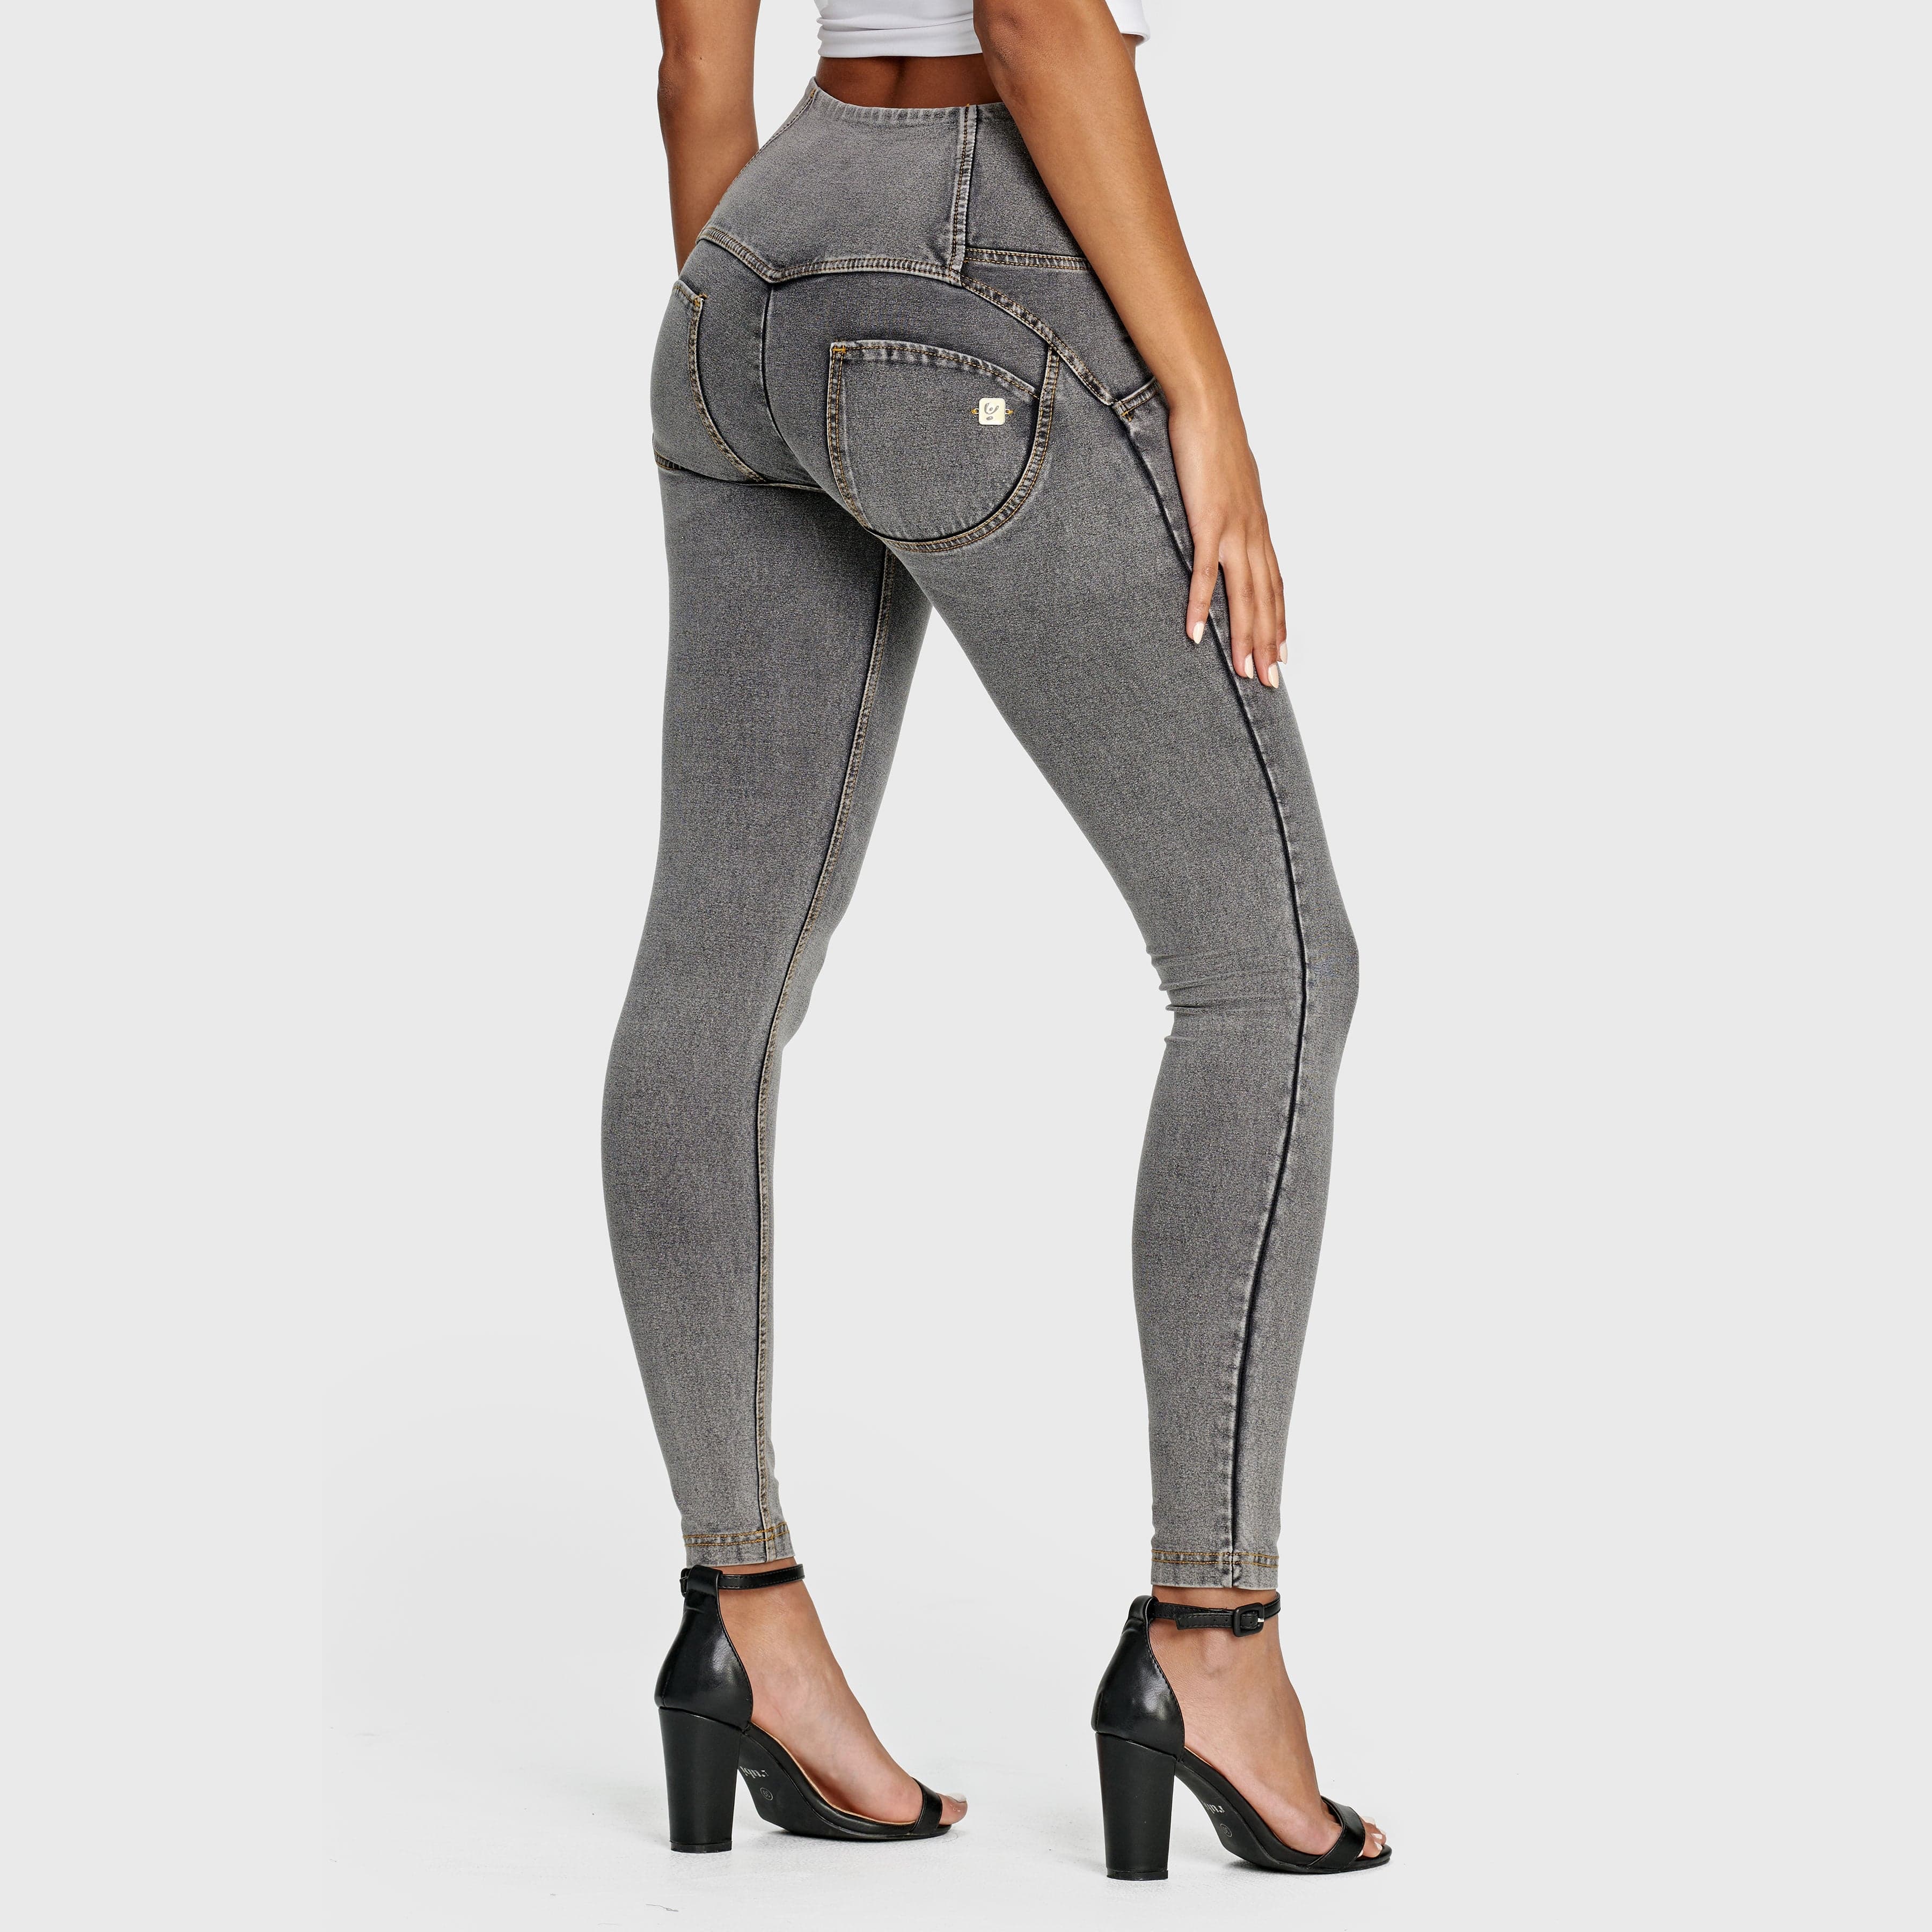 WR.UP® Denim - 3 Button High Waisted - Full Length - Grey + Yellow Stitching 2